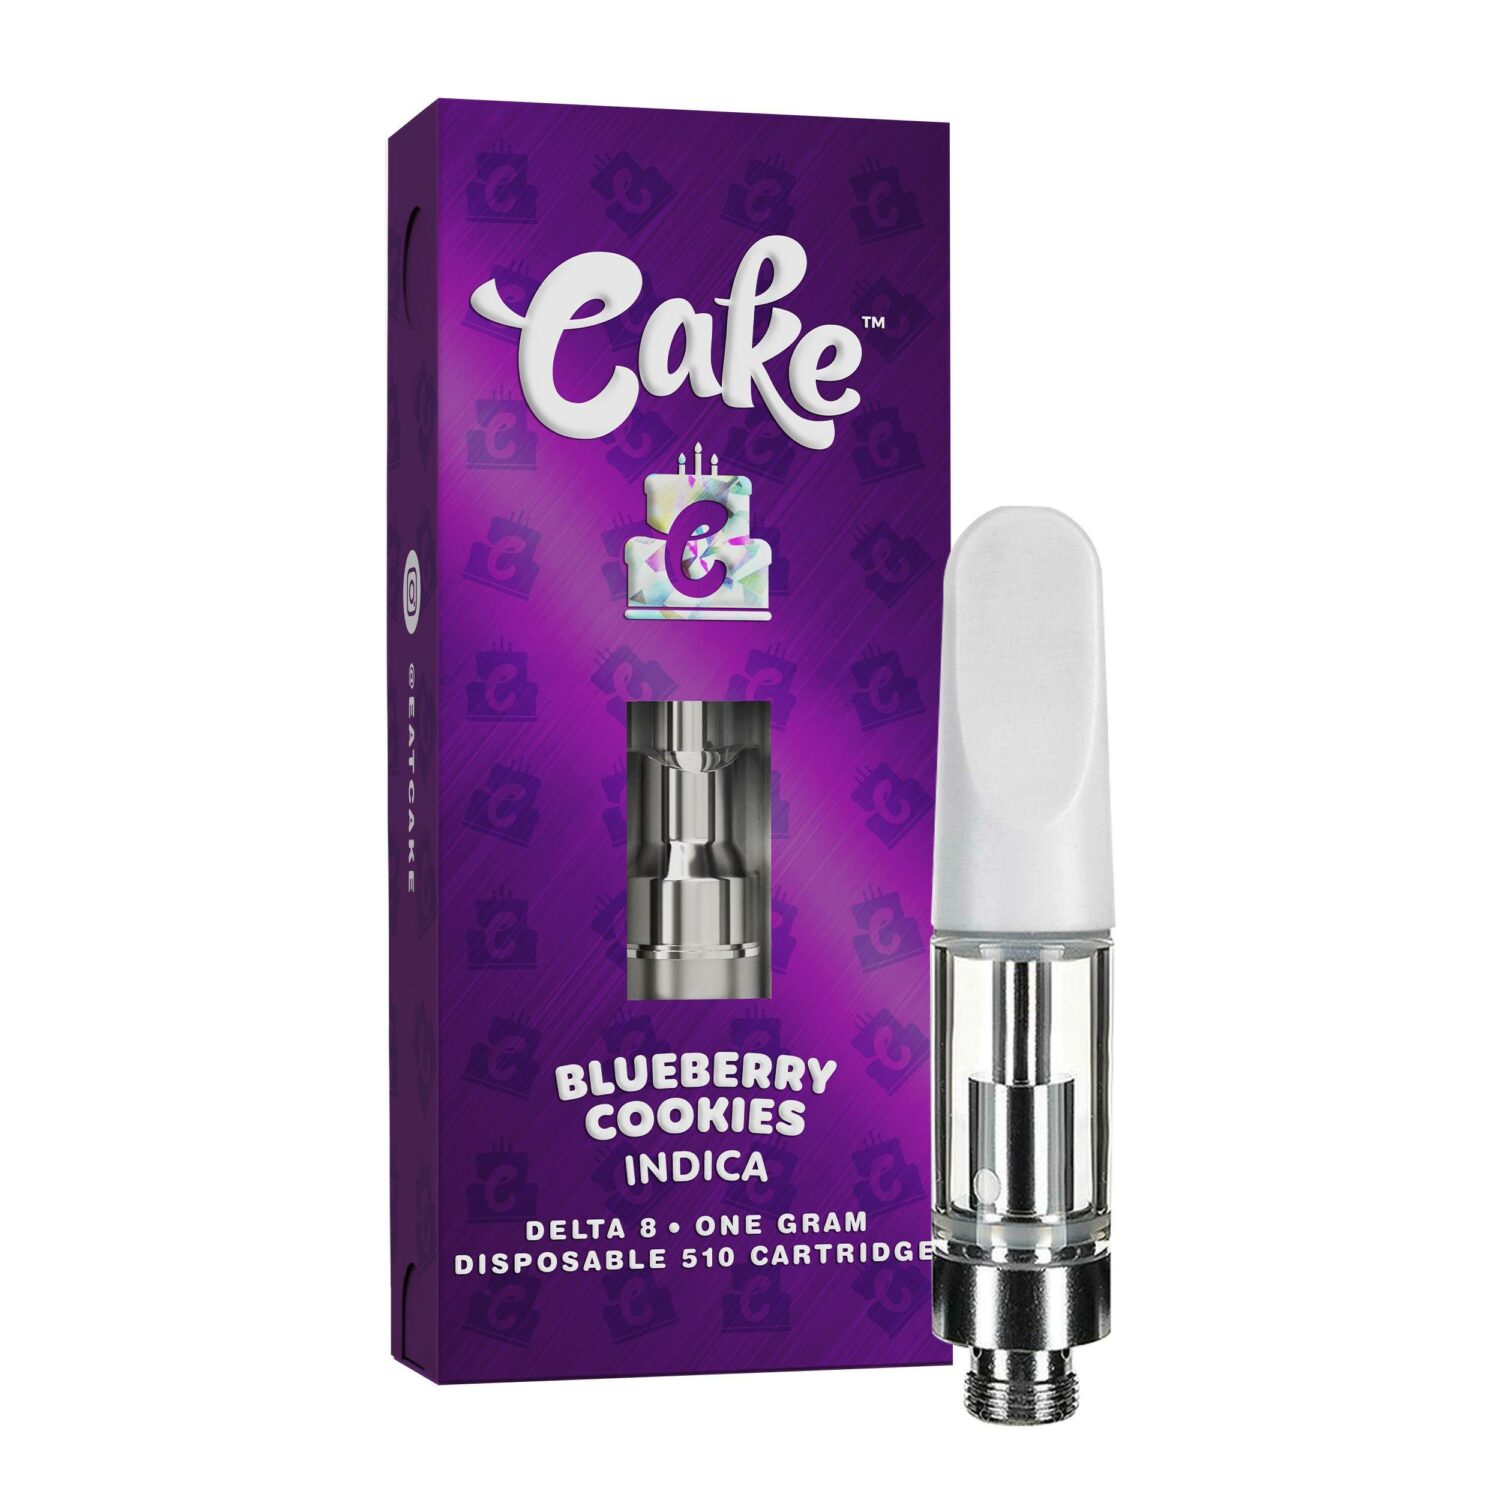 d8gas-cake-delta-8-cartridges-blueberry-cookies-scaled-1.jpg